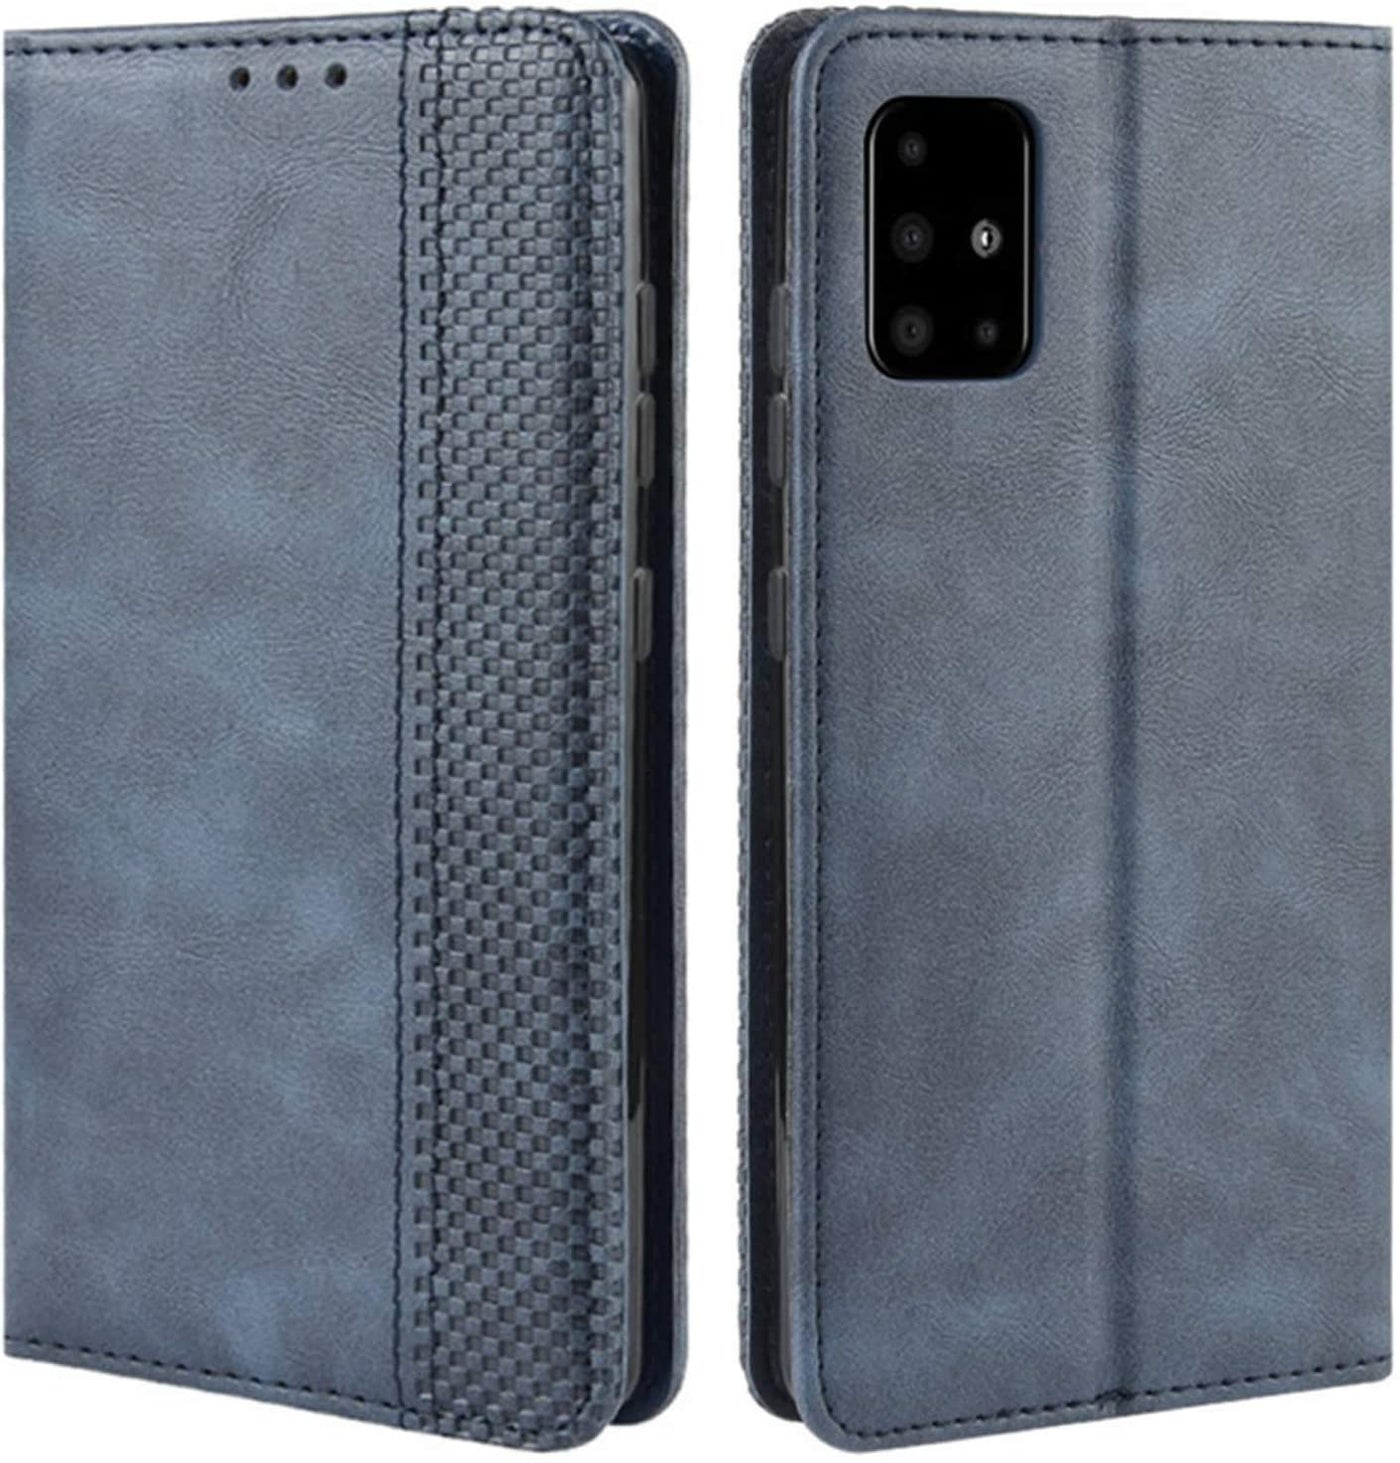 Samsung Galaxy A51 blue color leather wallet flip cover case By excelsior